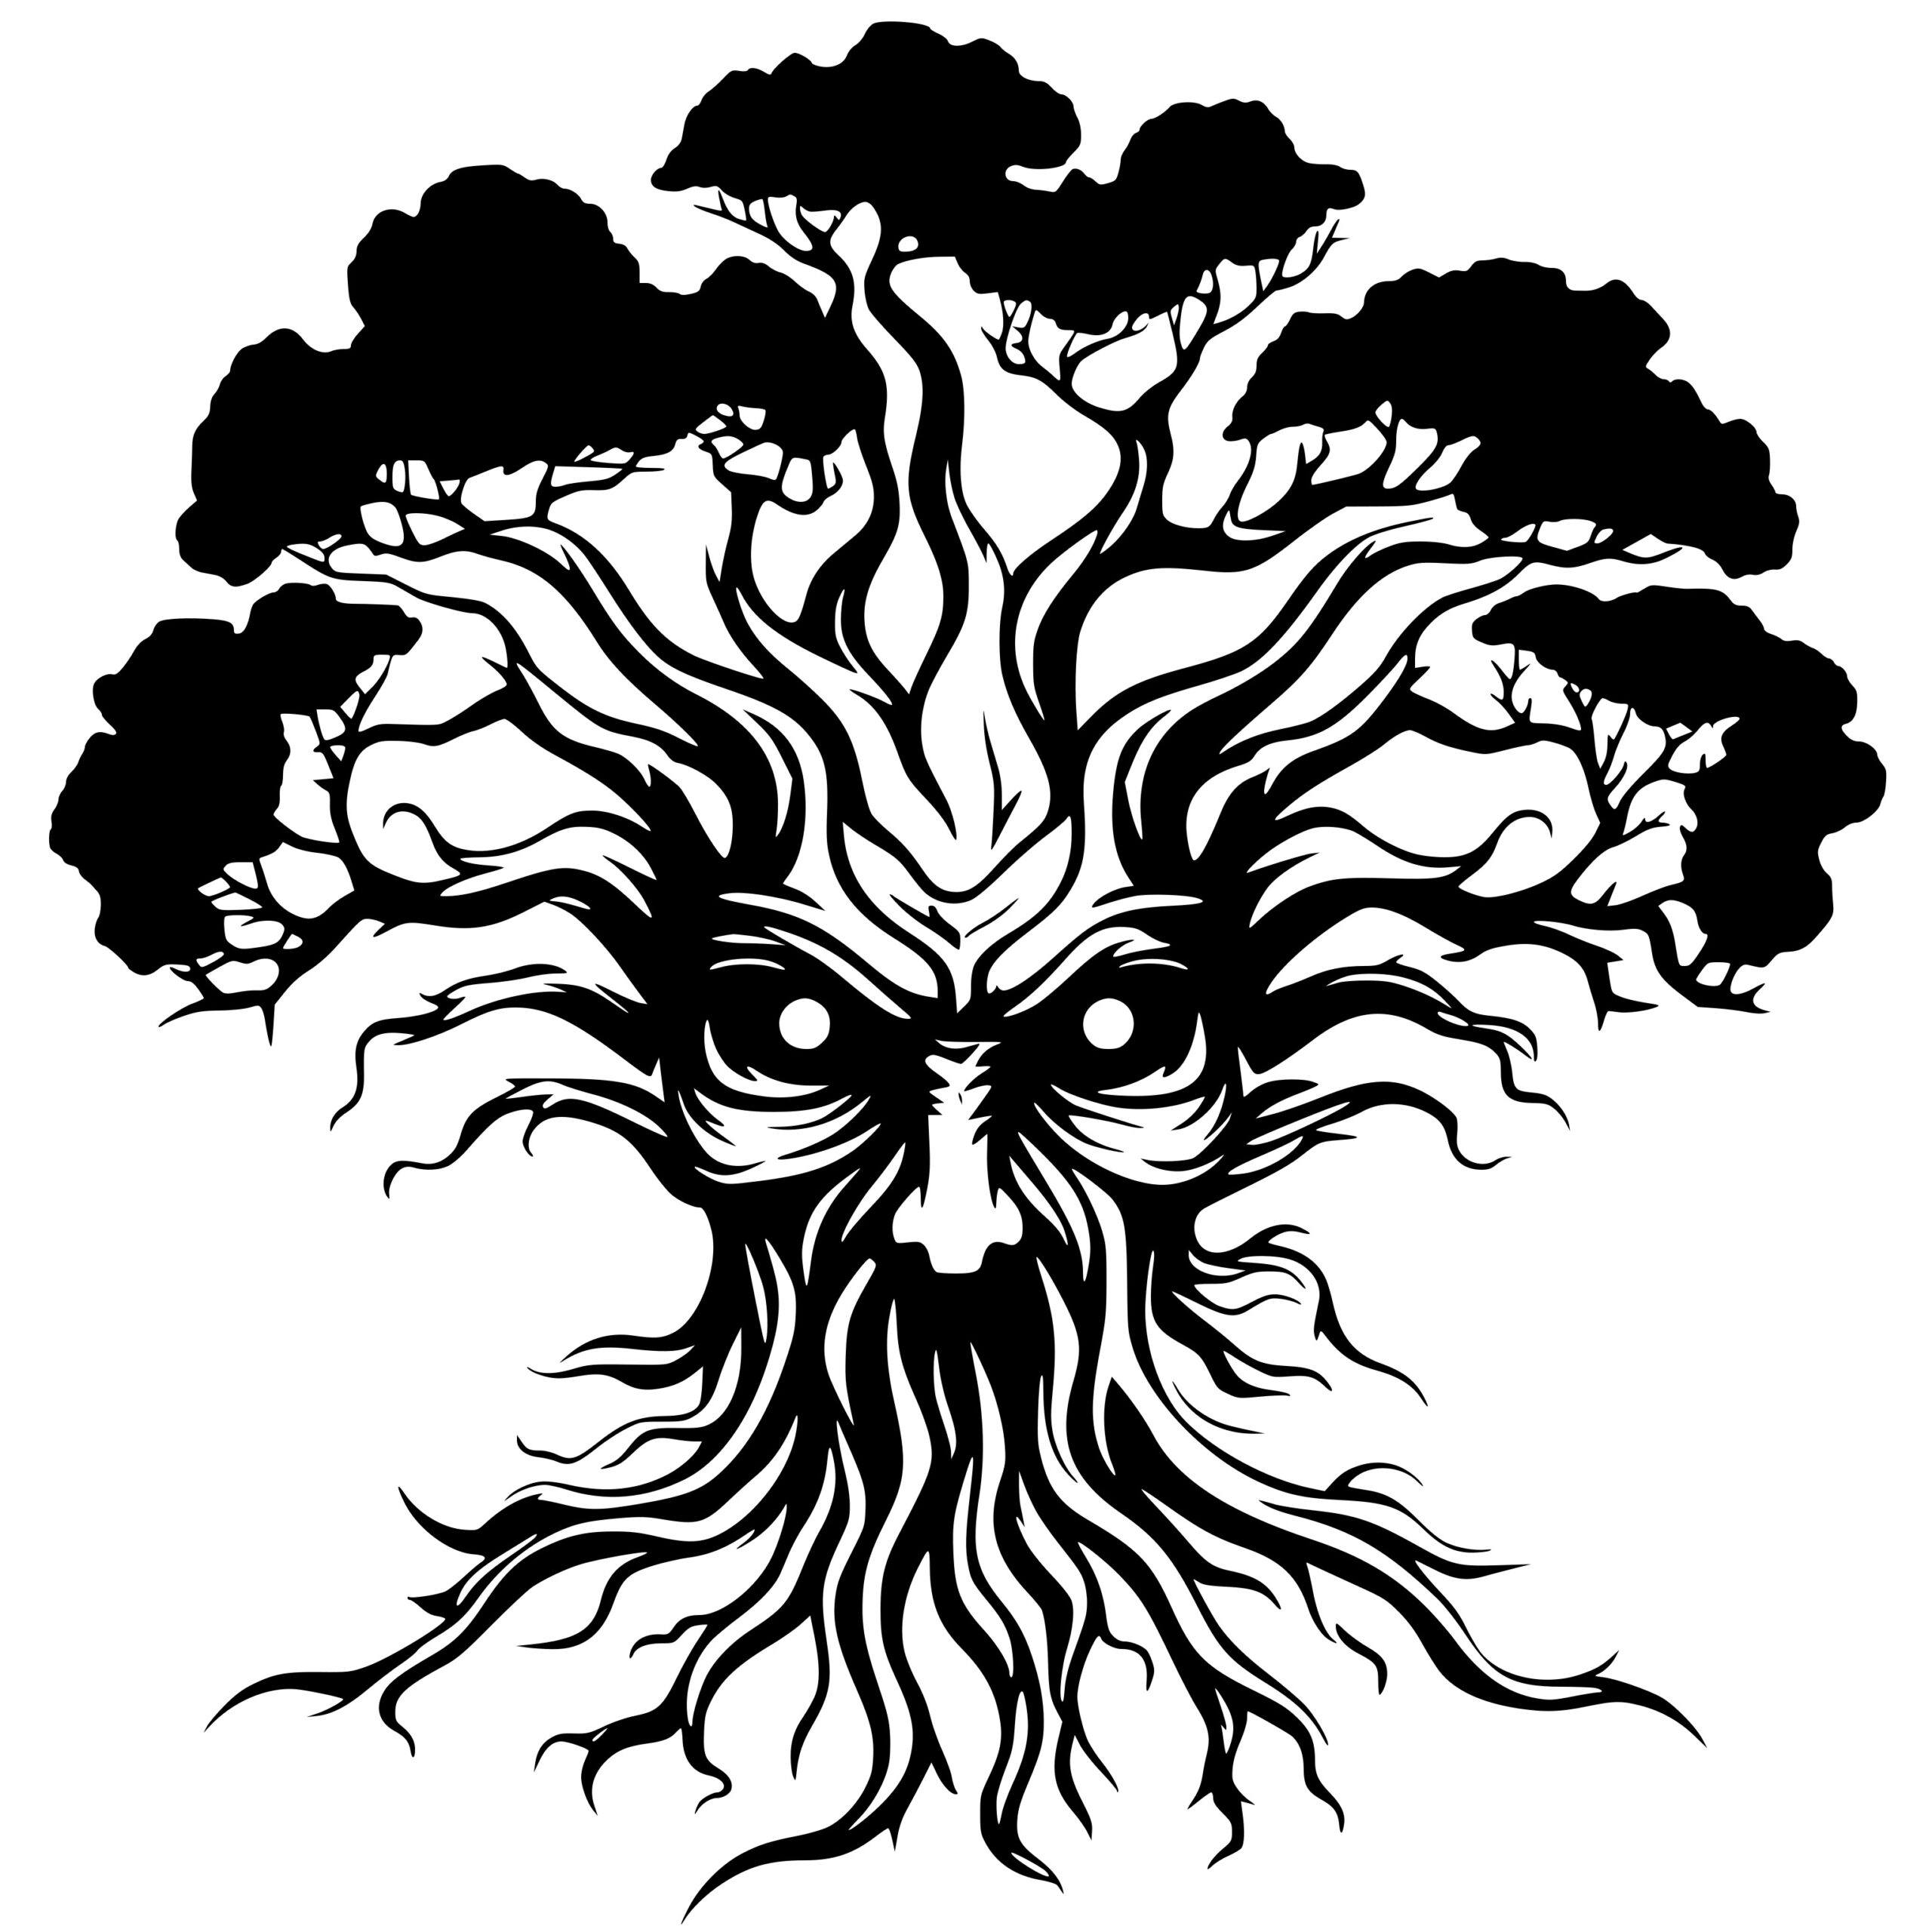 Wise Old Tree SVG File for Cricut, Silhouette, Laser Machines